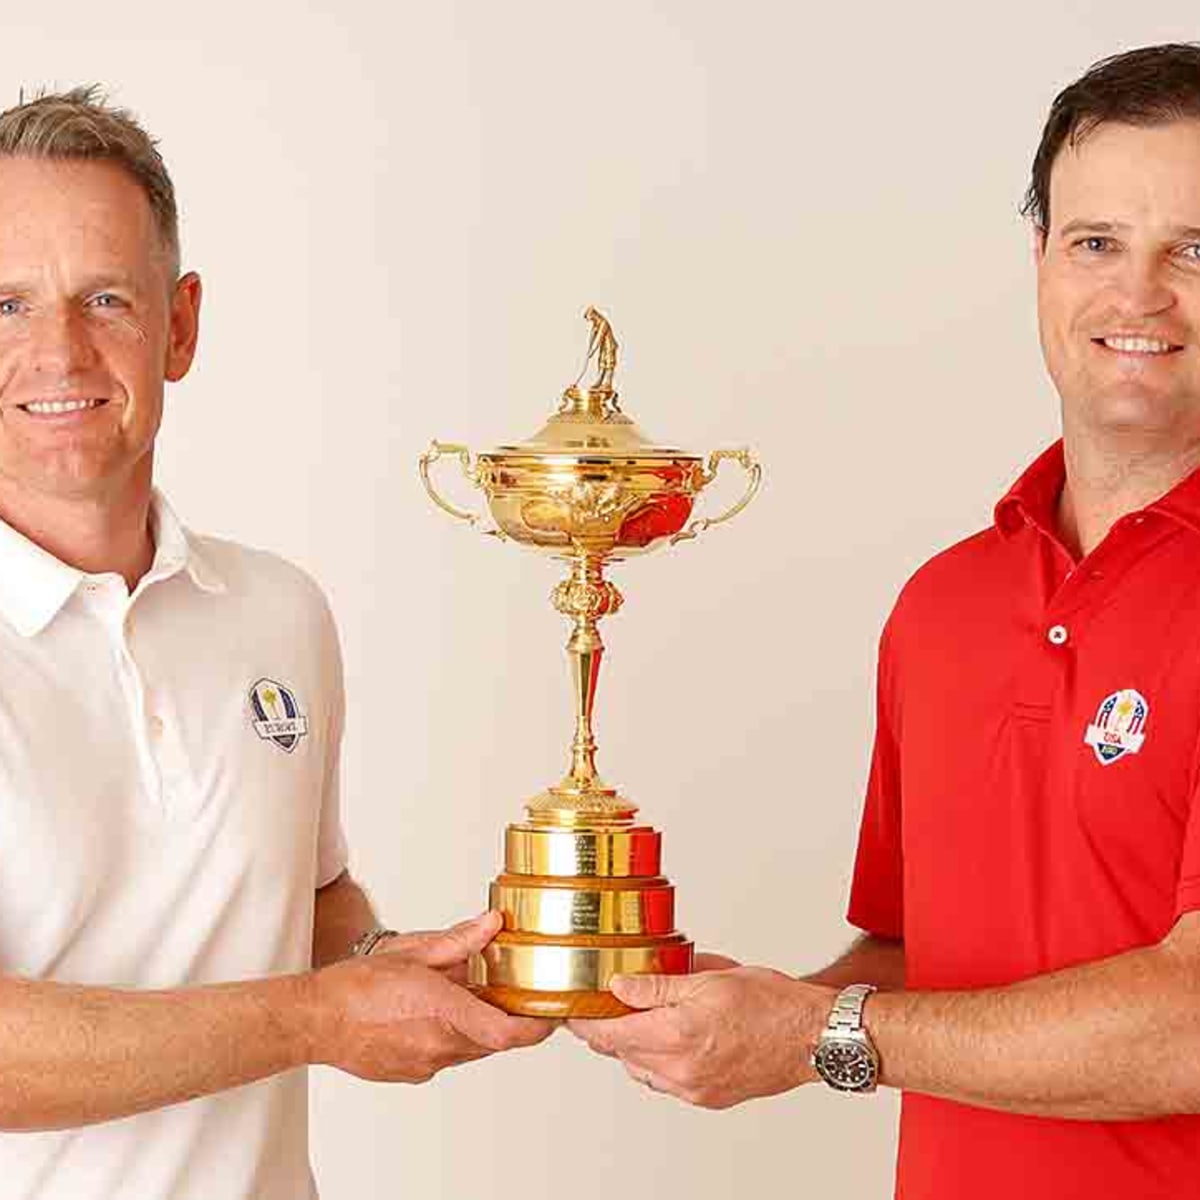 World Champions Cup: How to watch, tee times, groupings for Sunday